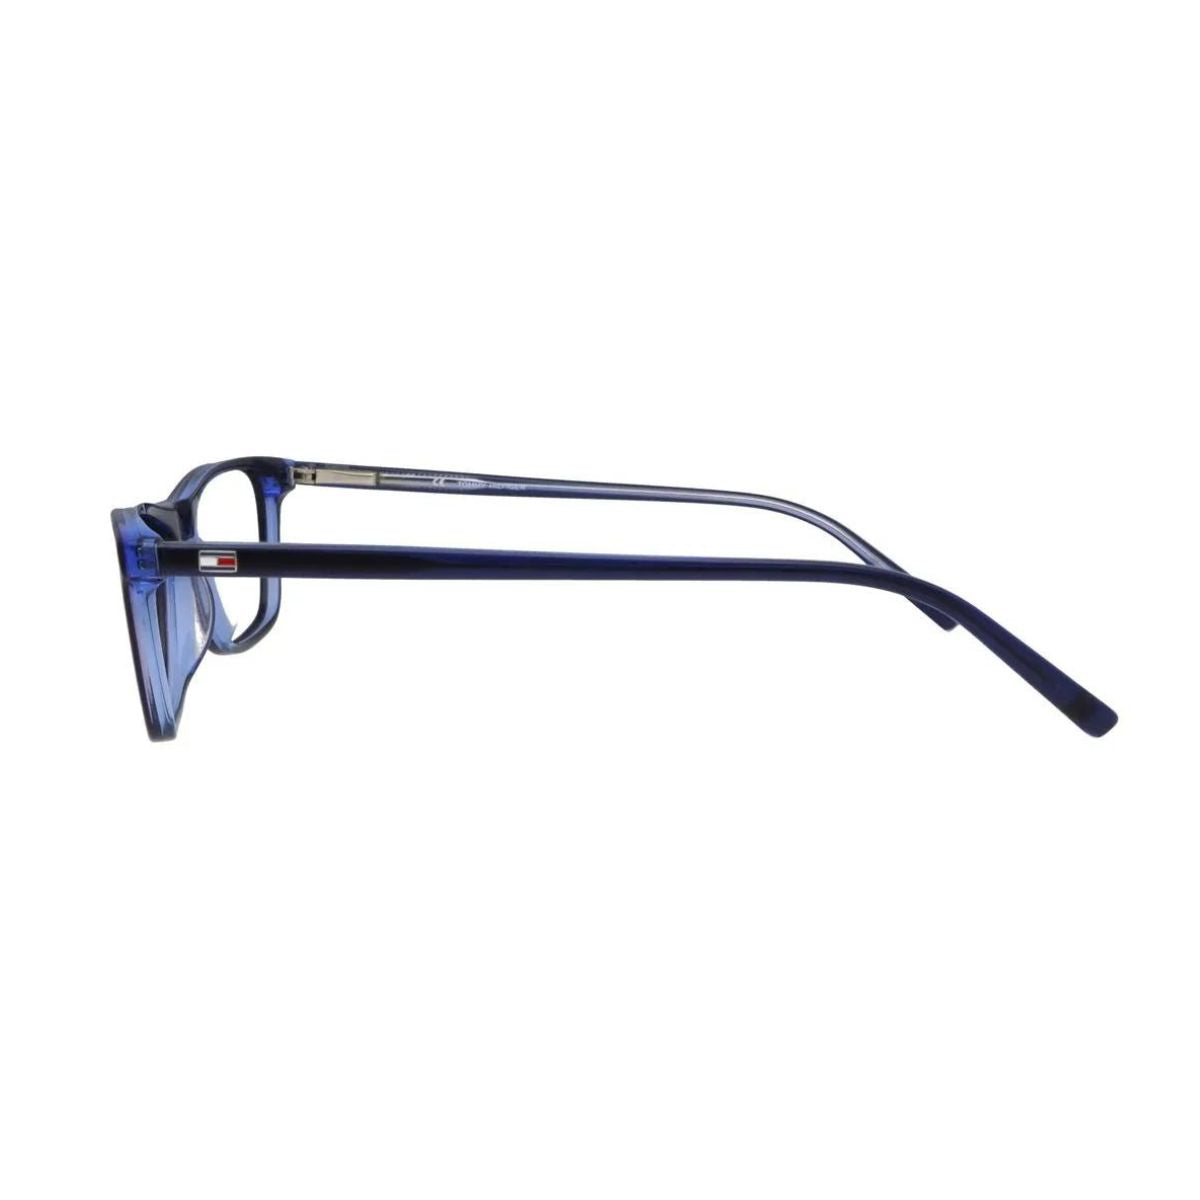 "best Tommy Hilfiger 3204 C4 spactacle frame for men and women online at optorium"